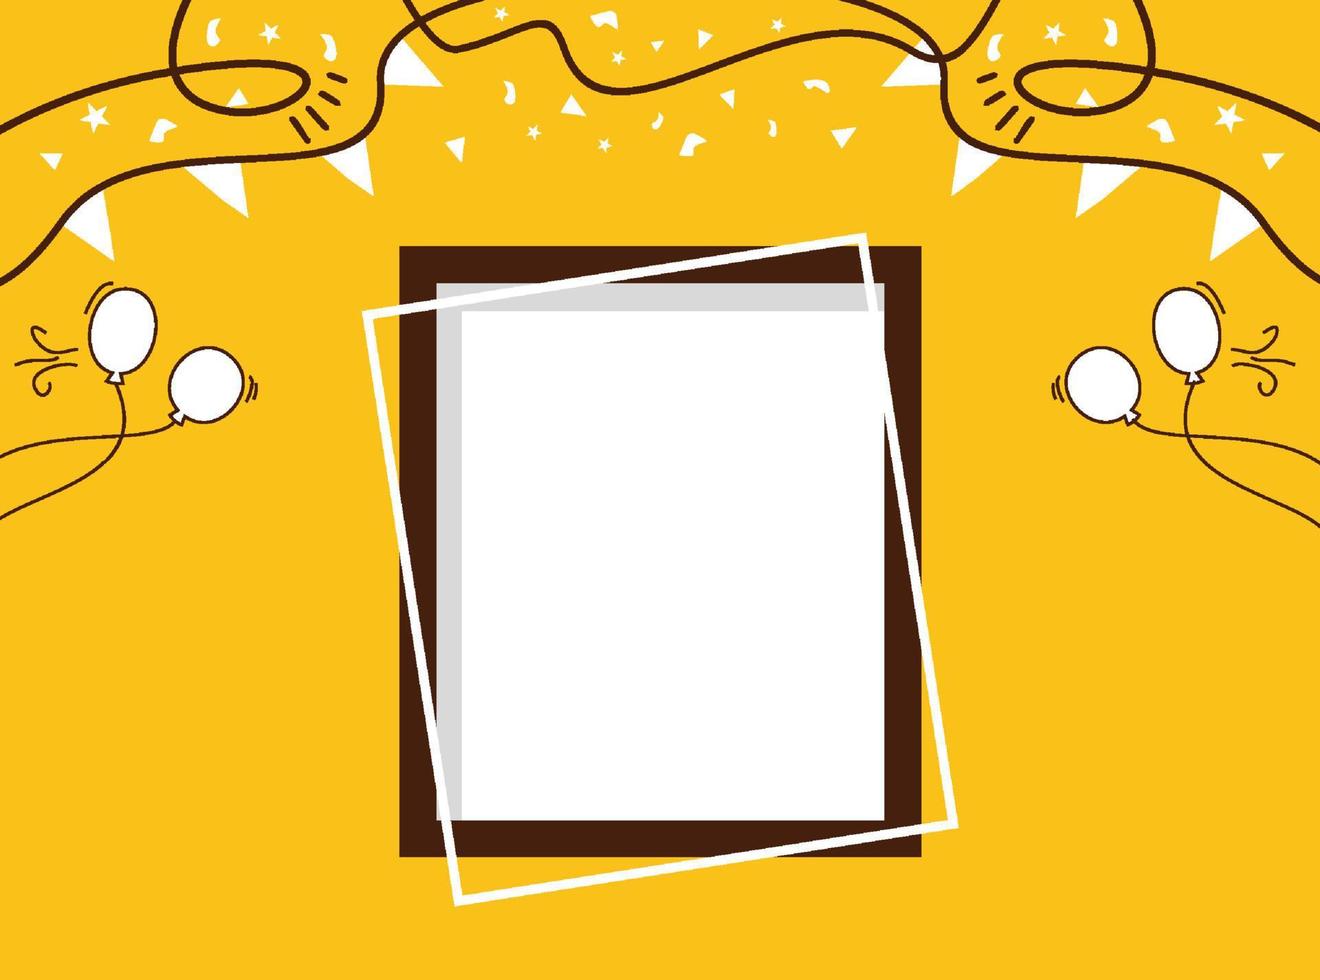 Brown photo frame design with party background vector